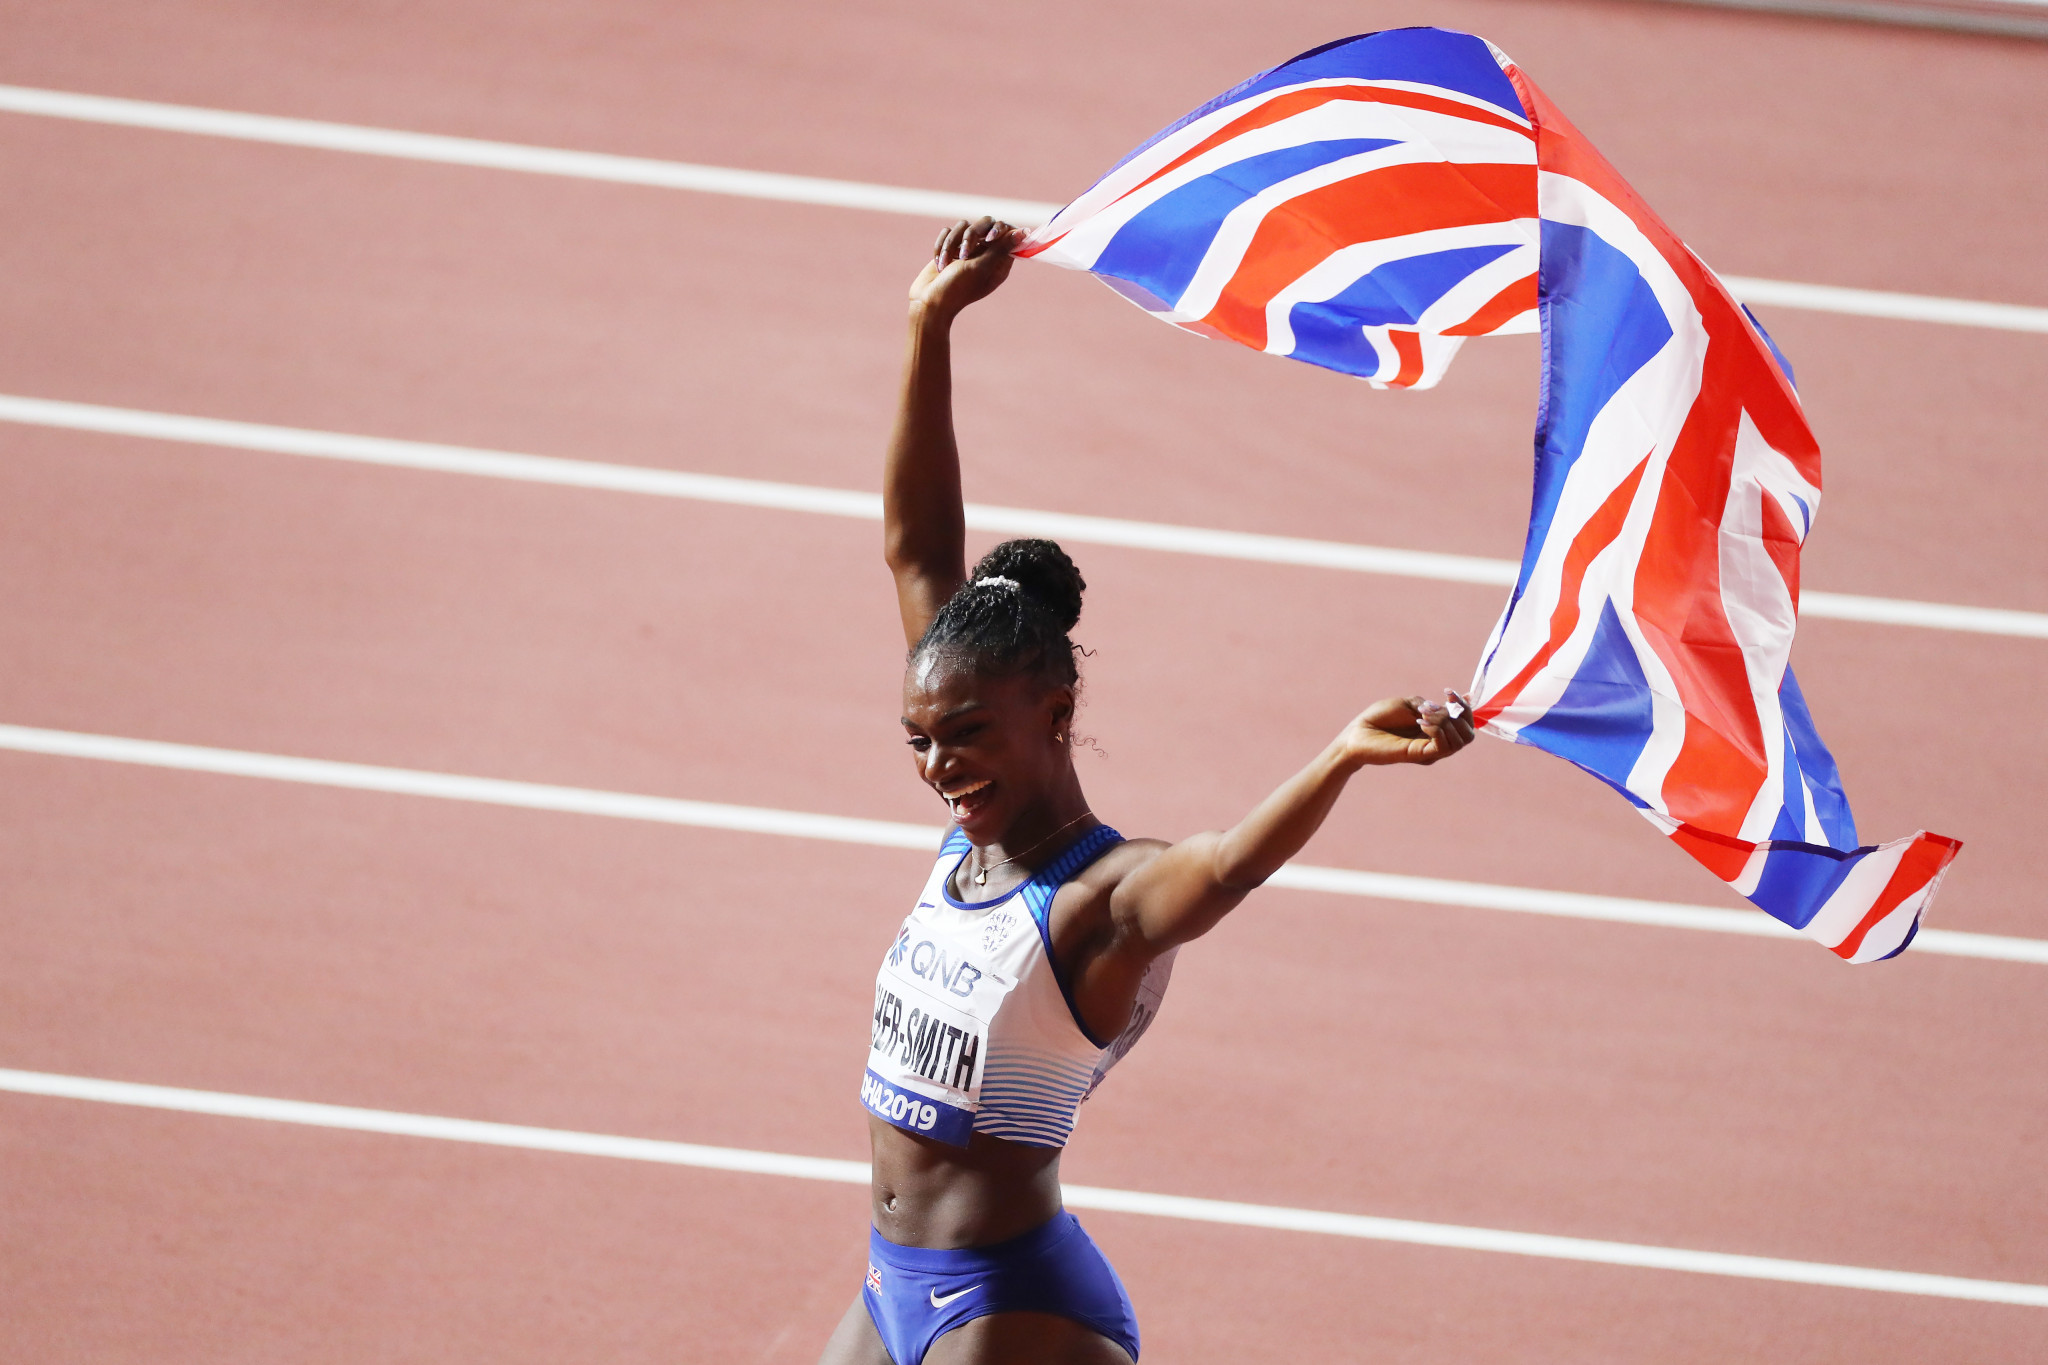 Dina Asher-Smith of Great Britain celebrates after winning gold in the women's 200 metres final at the IAAF World Championships in Doha ©Getty Images